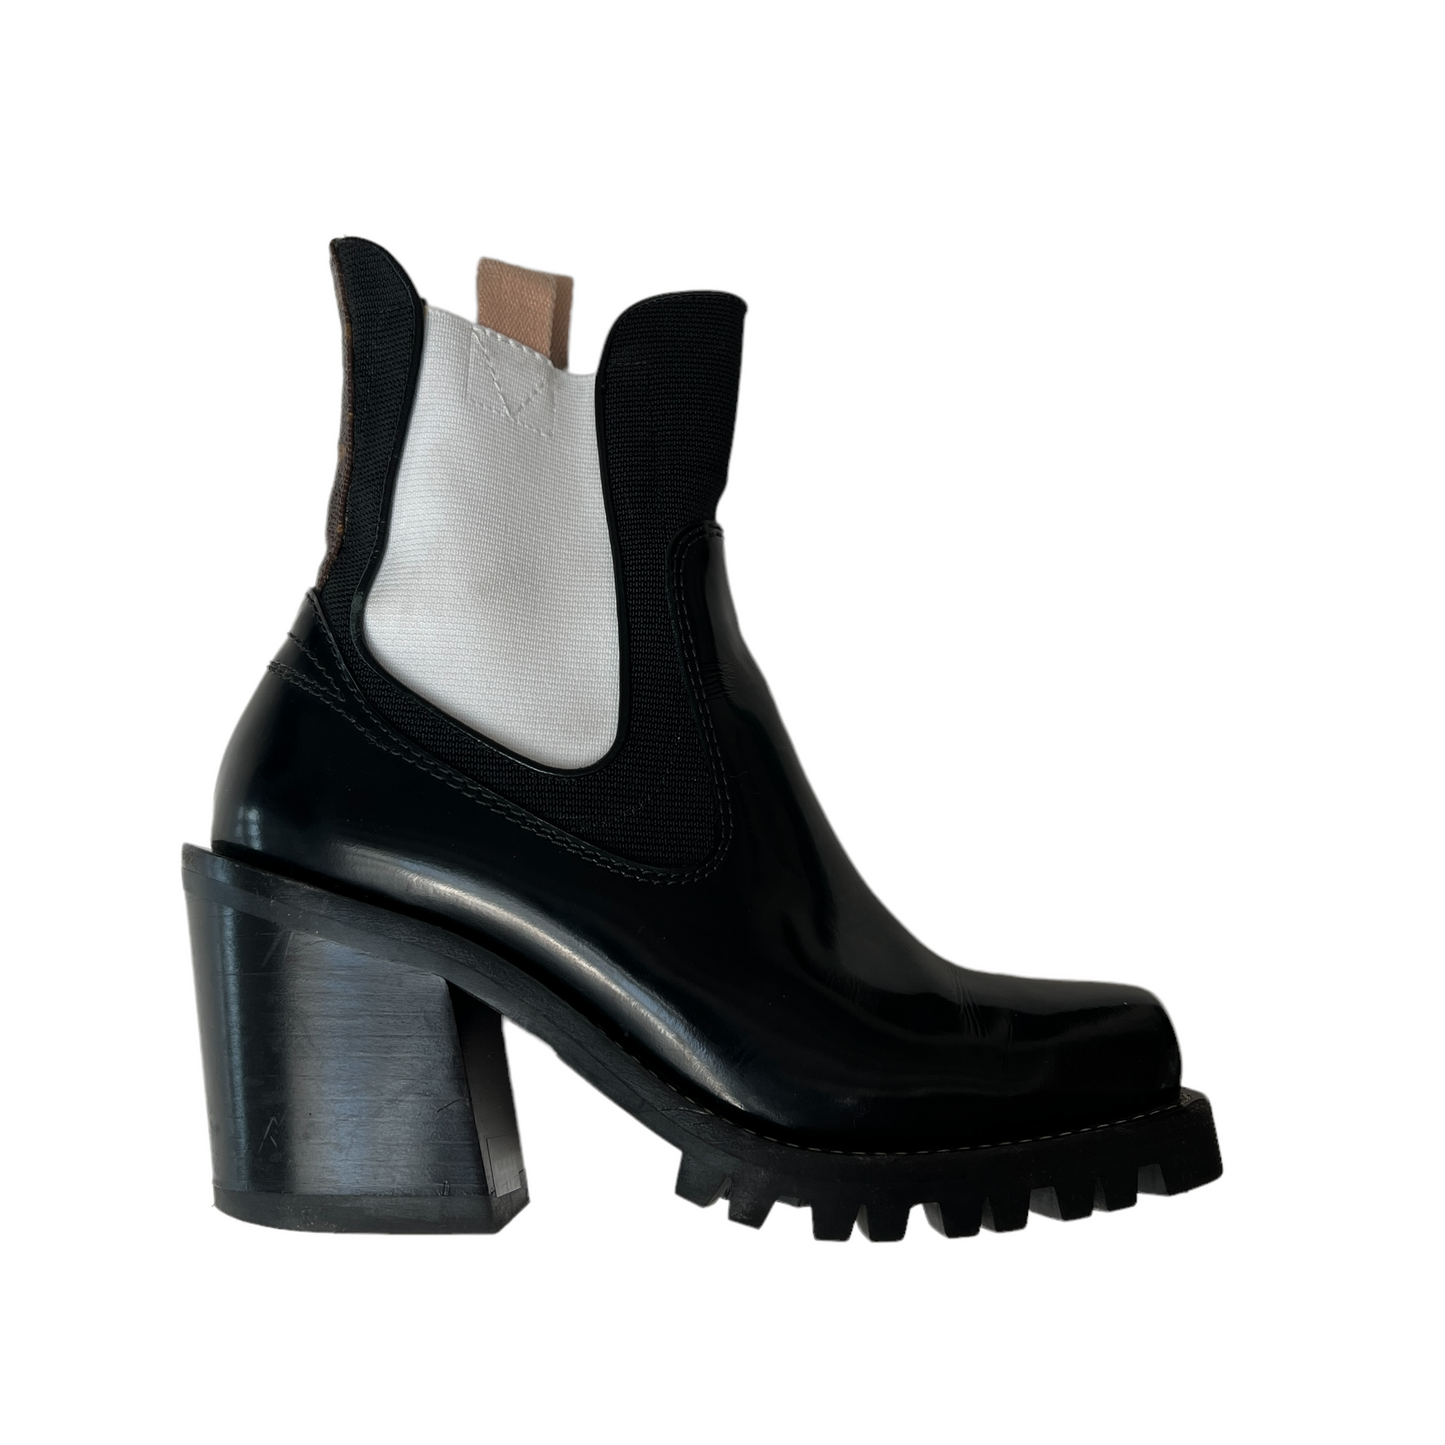 Chelsea Boots - 6.5